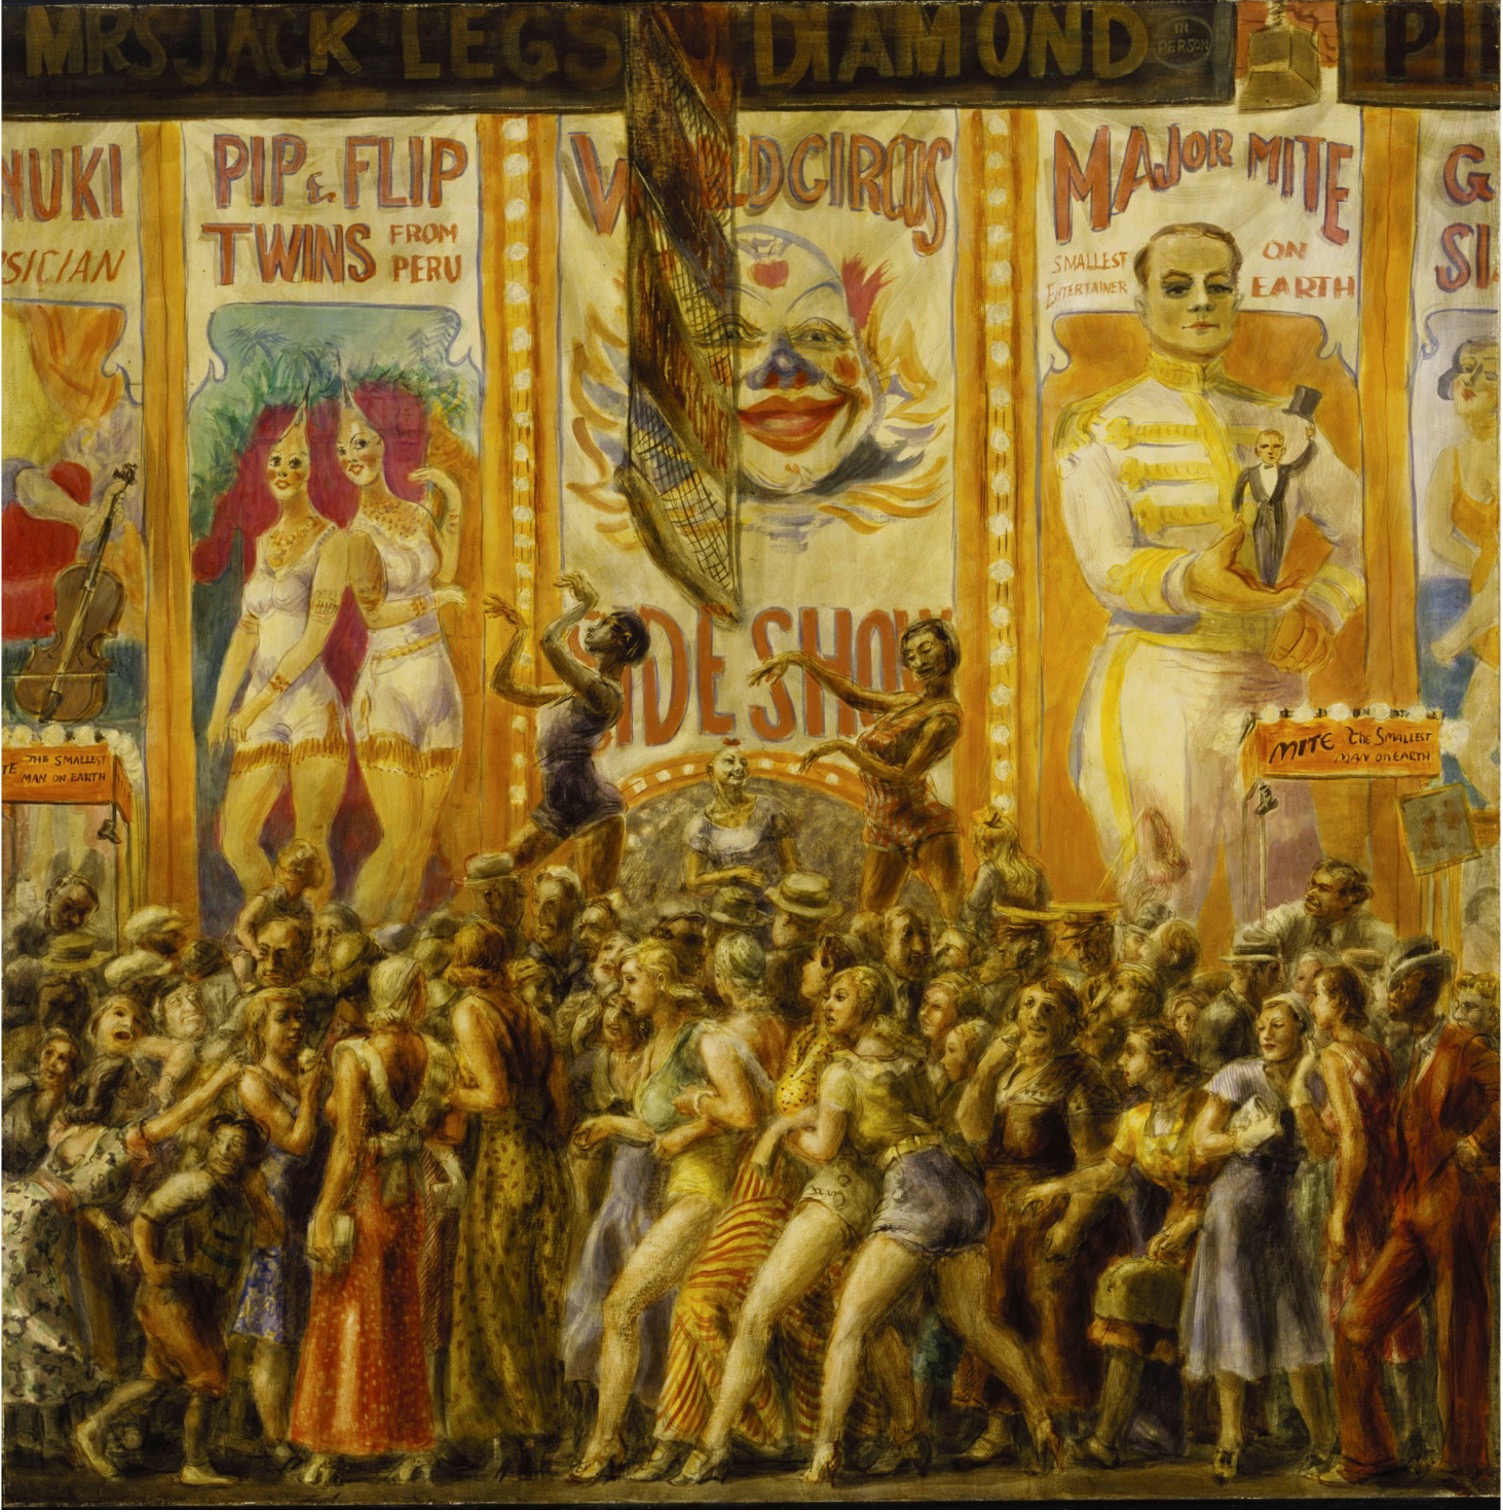 A Painting of crowds walk by Coney Island posters advertising the performers Pip & Flip